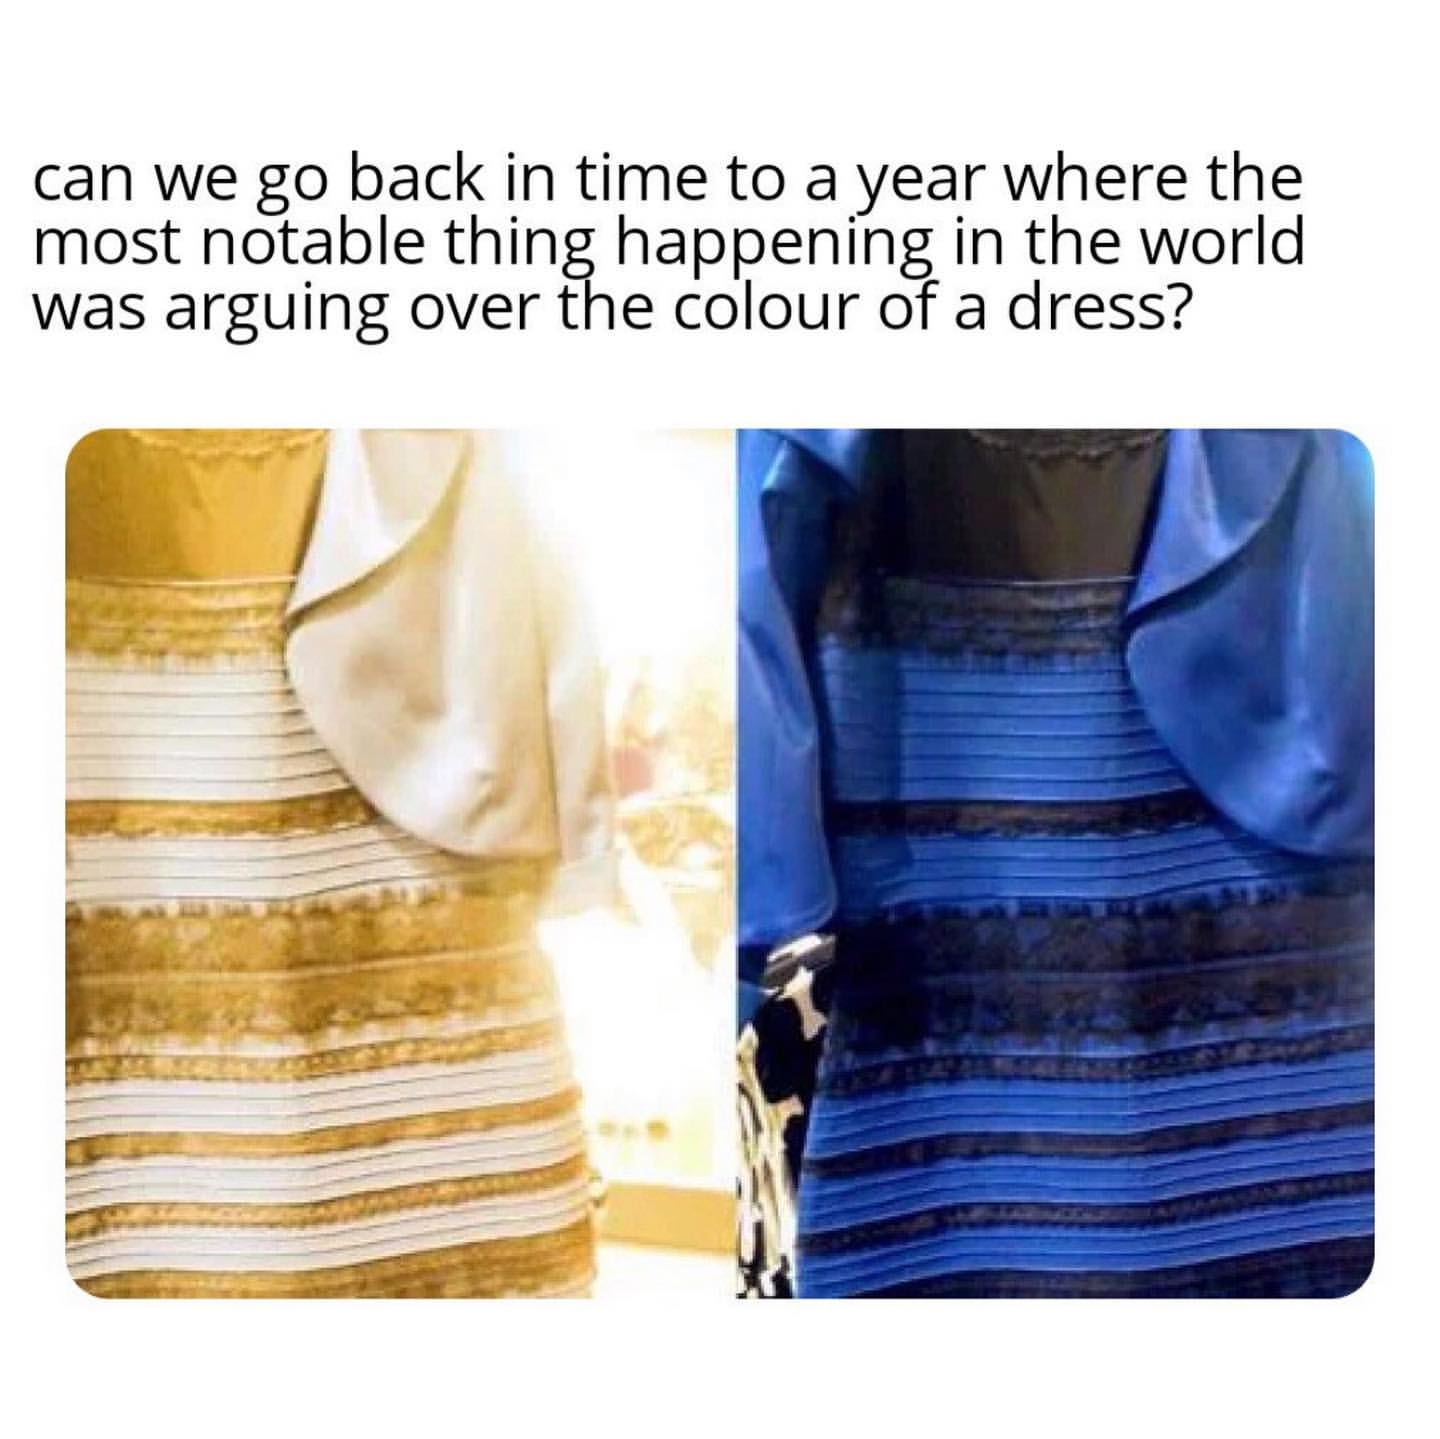 Can we go back in time to a year where the most notable thing happening in the world was arguing over the colour of a dress?